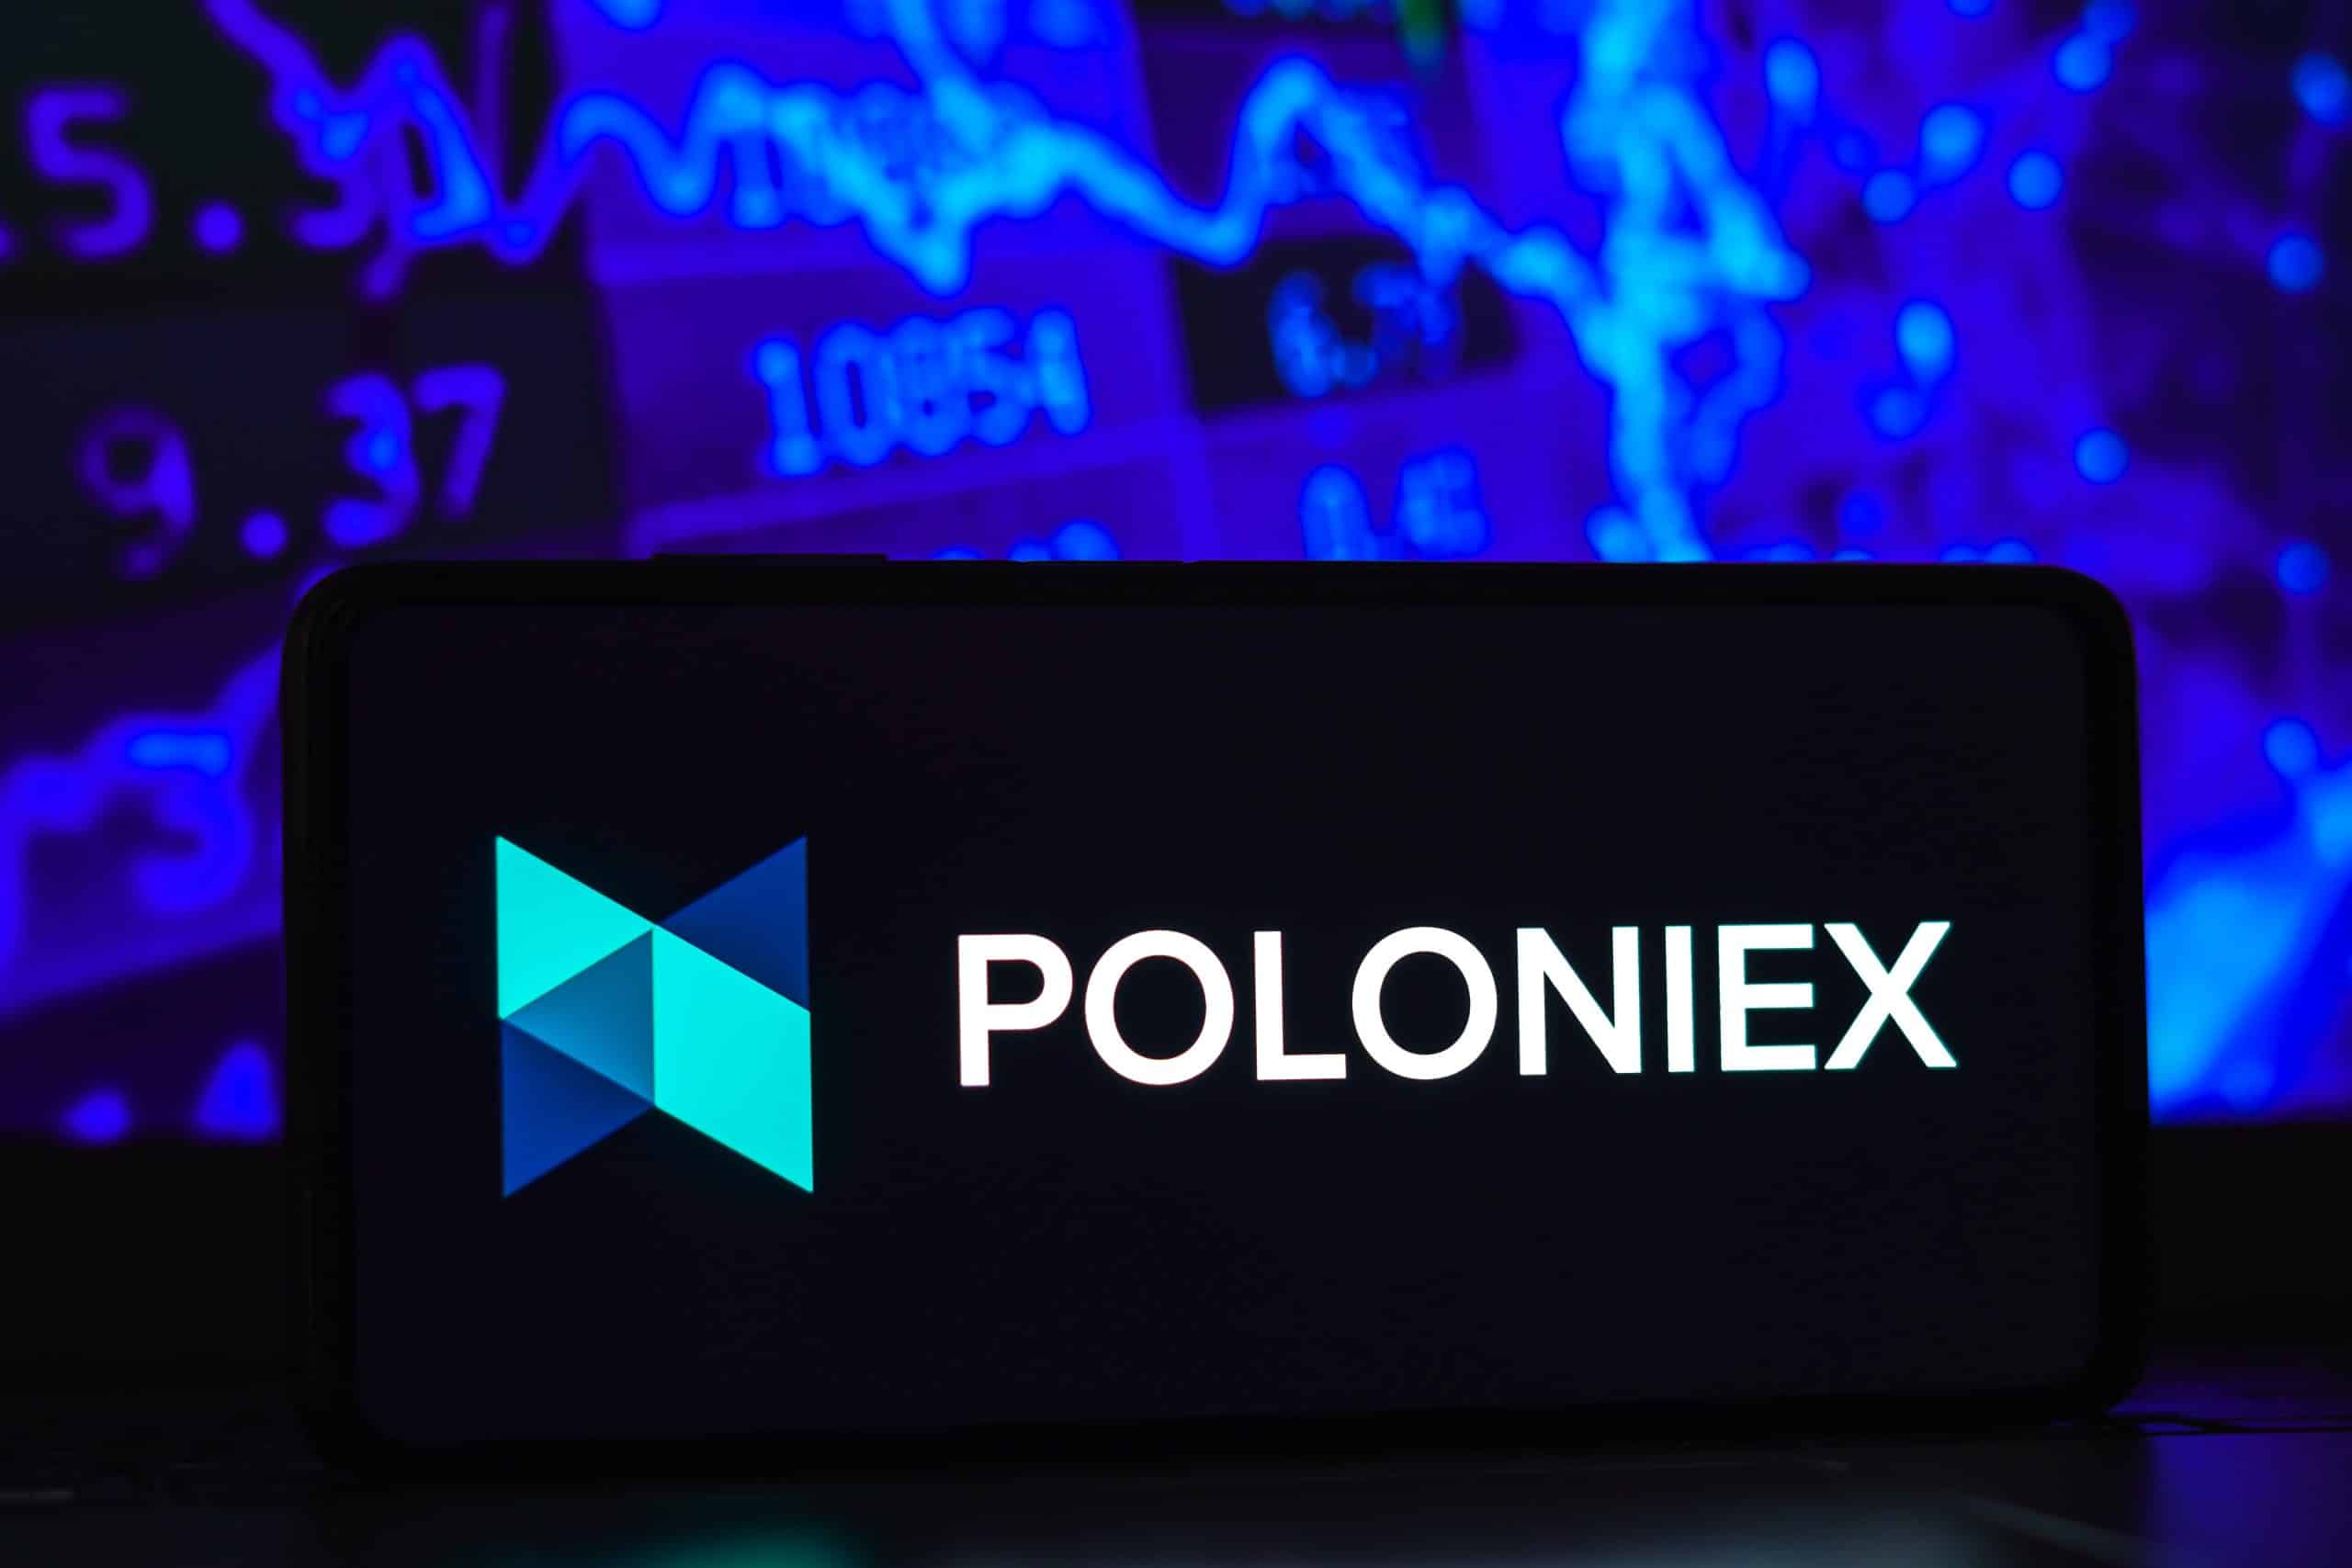 Poloniex to Resume Withdrawals Starting With TRX After $100M Hack